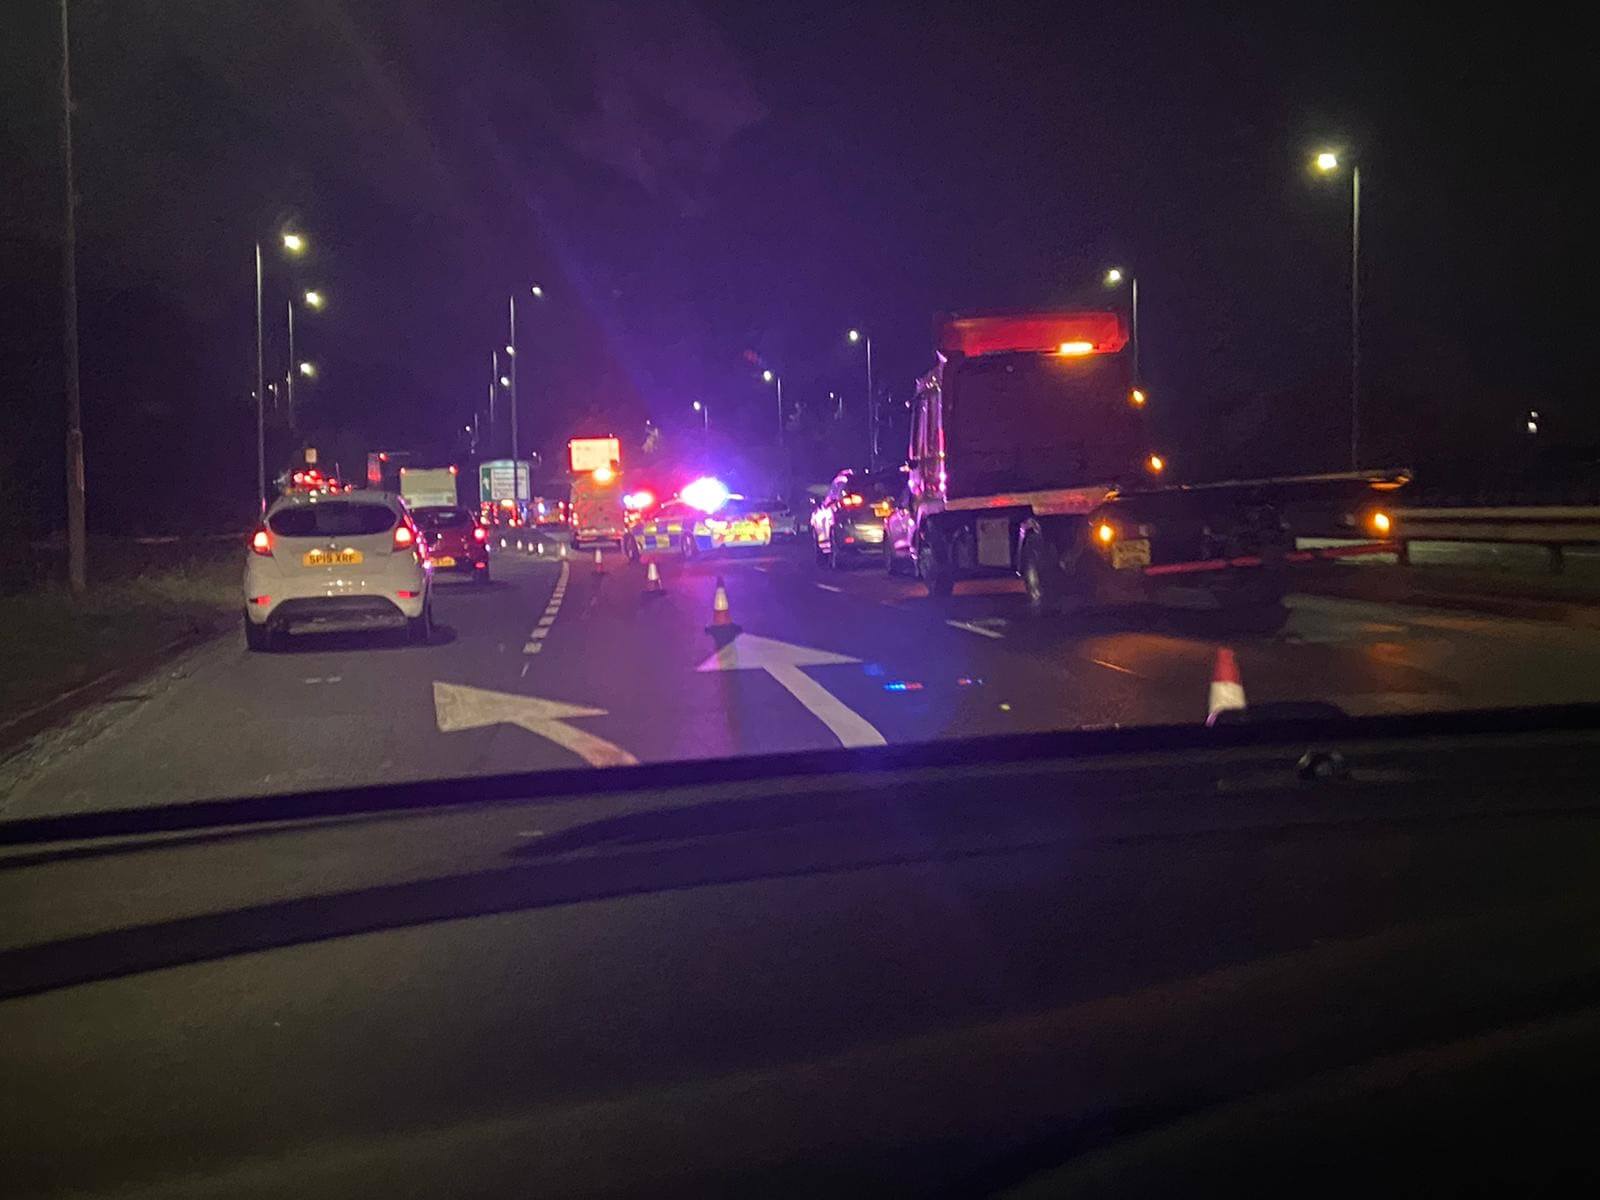 Bellshill Bypass Accident (September 2022) Latest Details About The Incident!